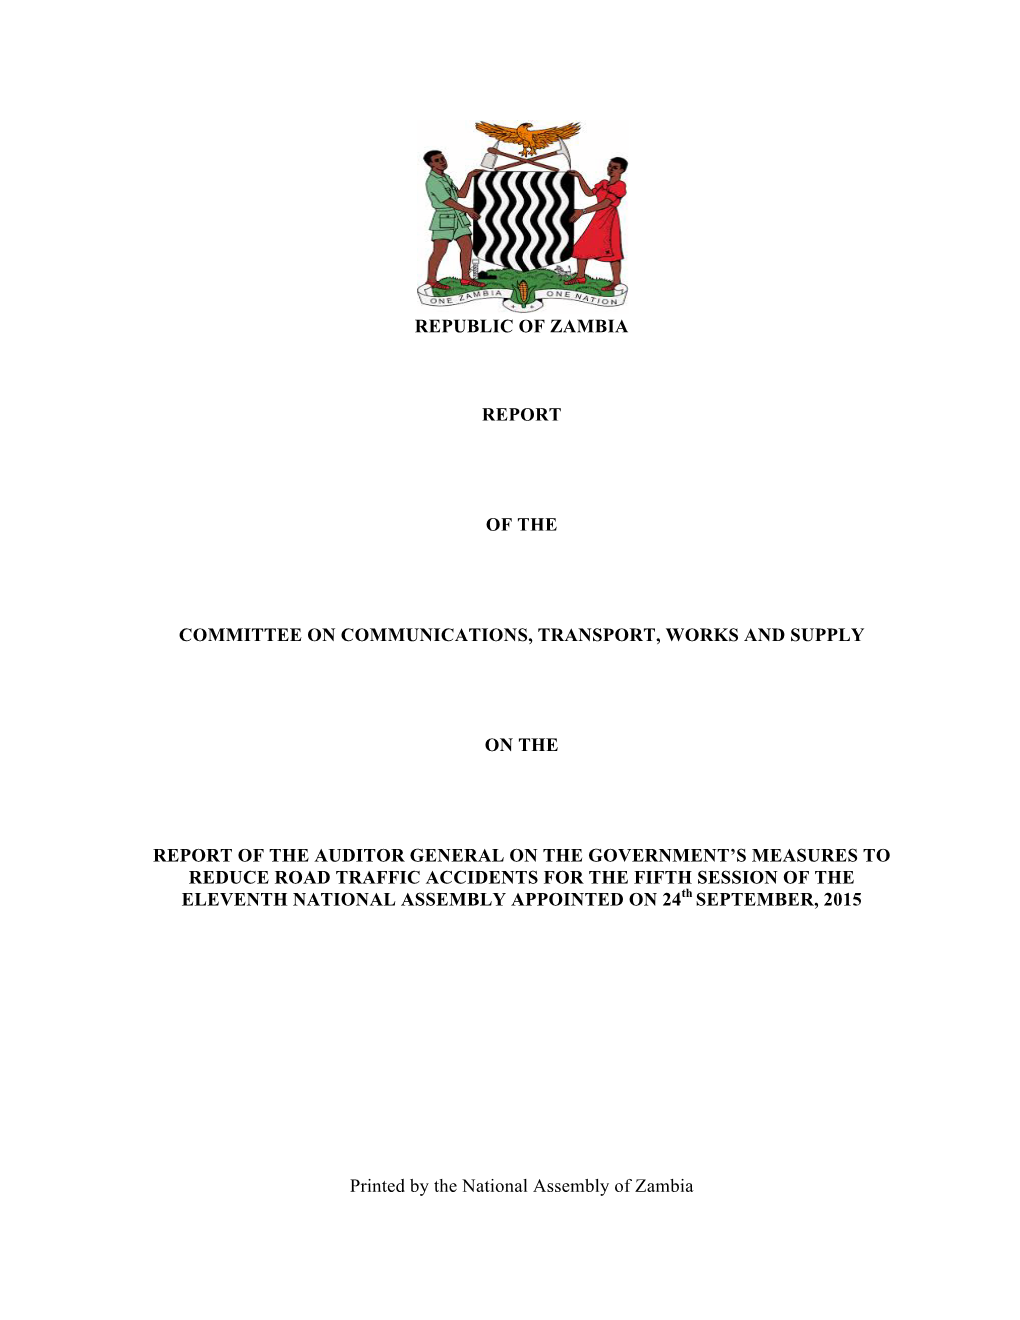 Report on the Report of the Auditor General